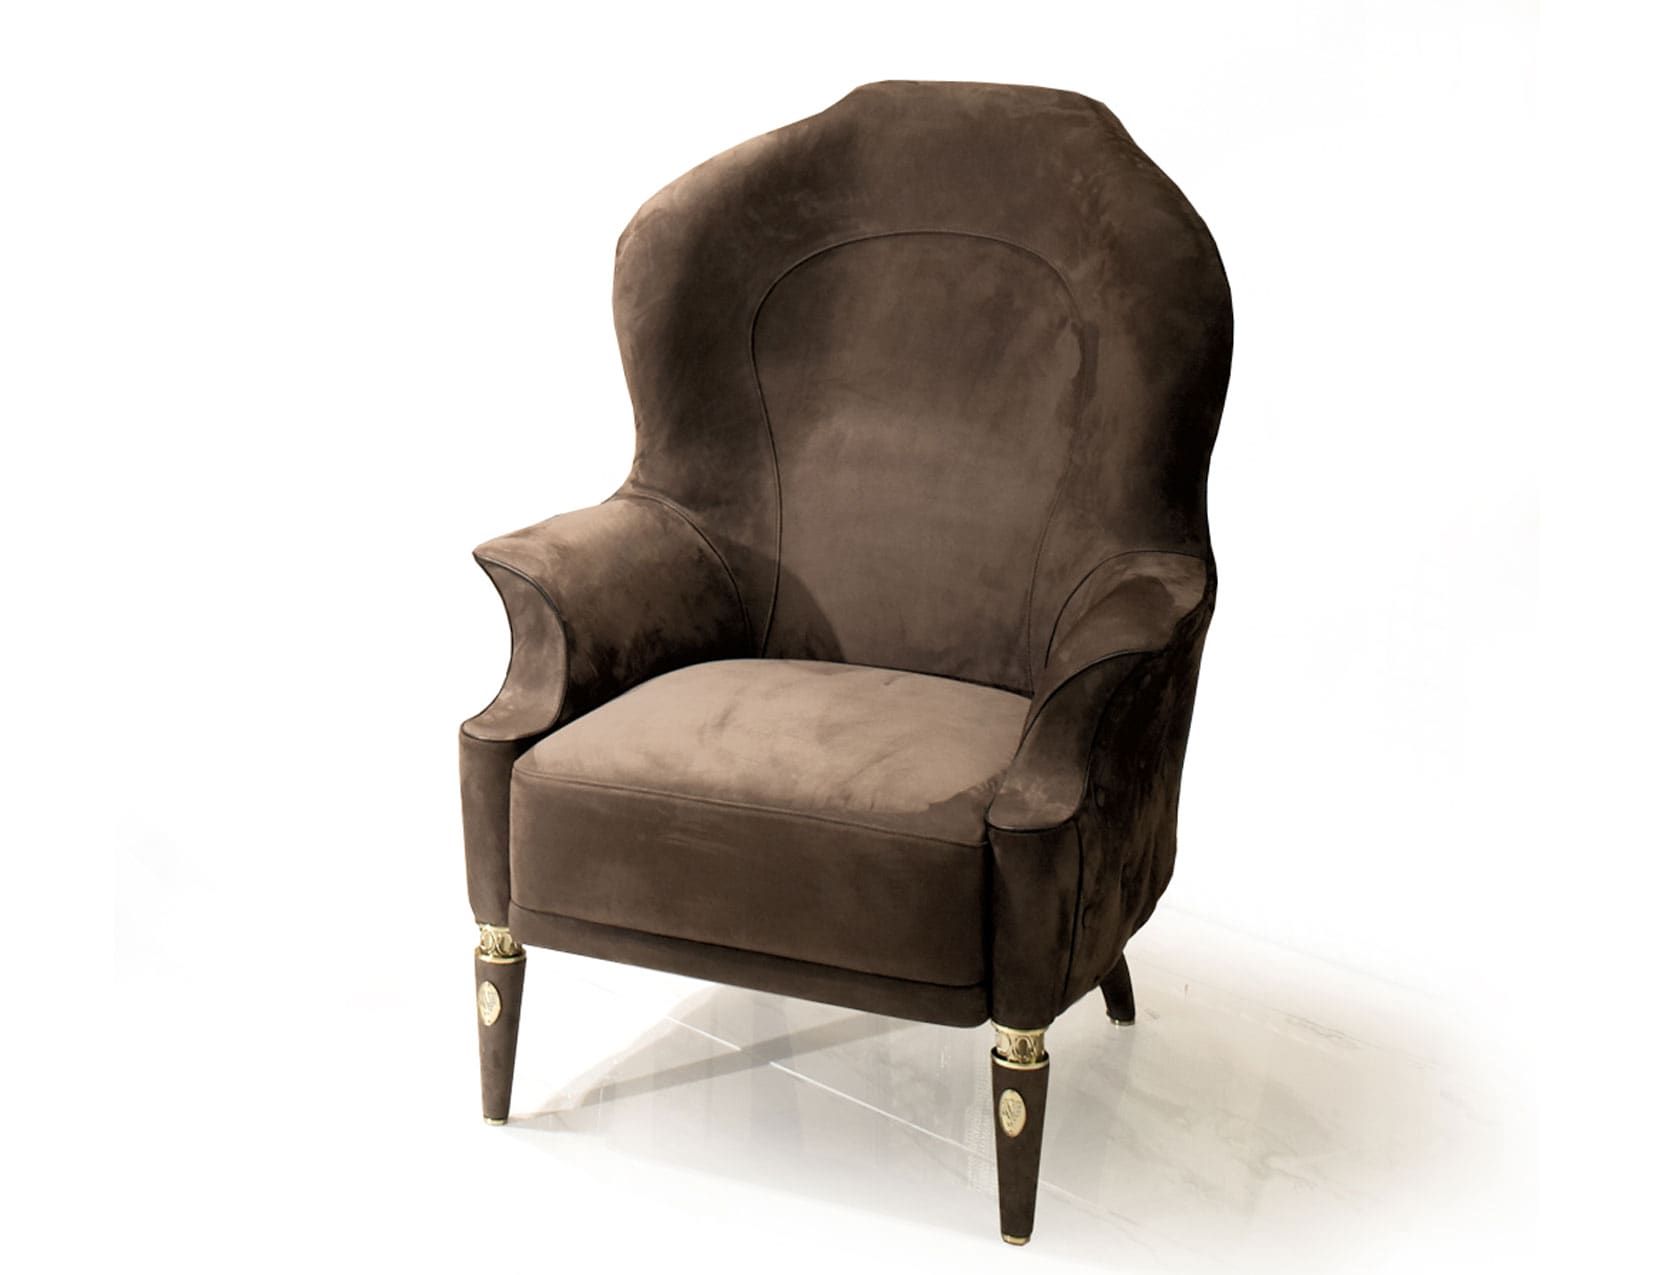 Alice modern luxury armchair with brown leather